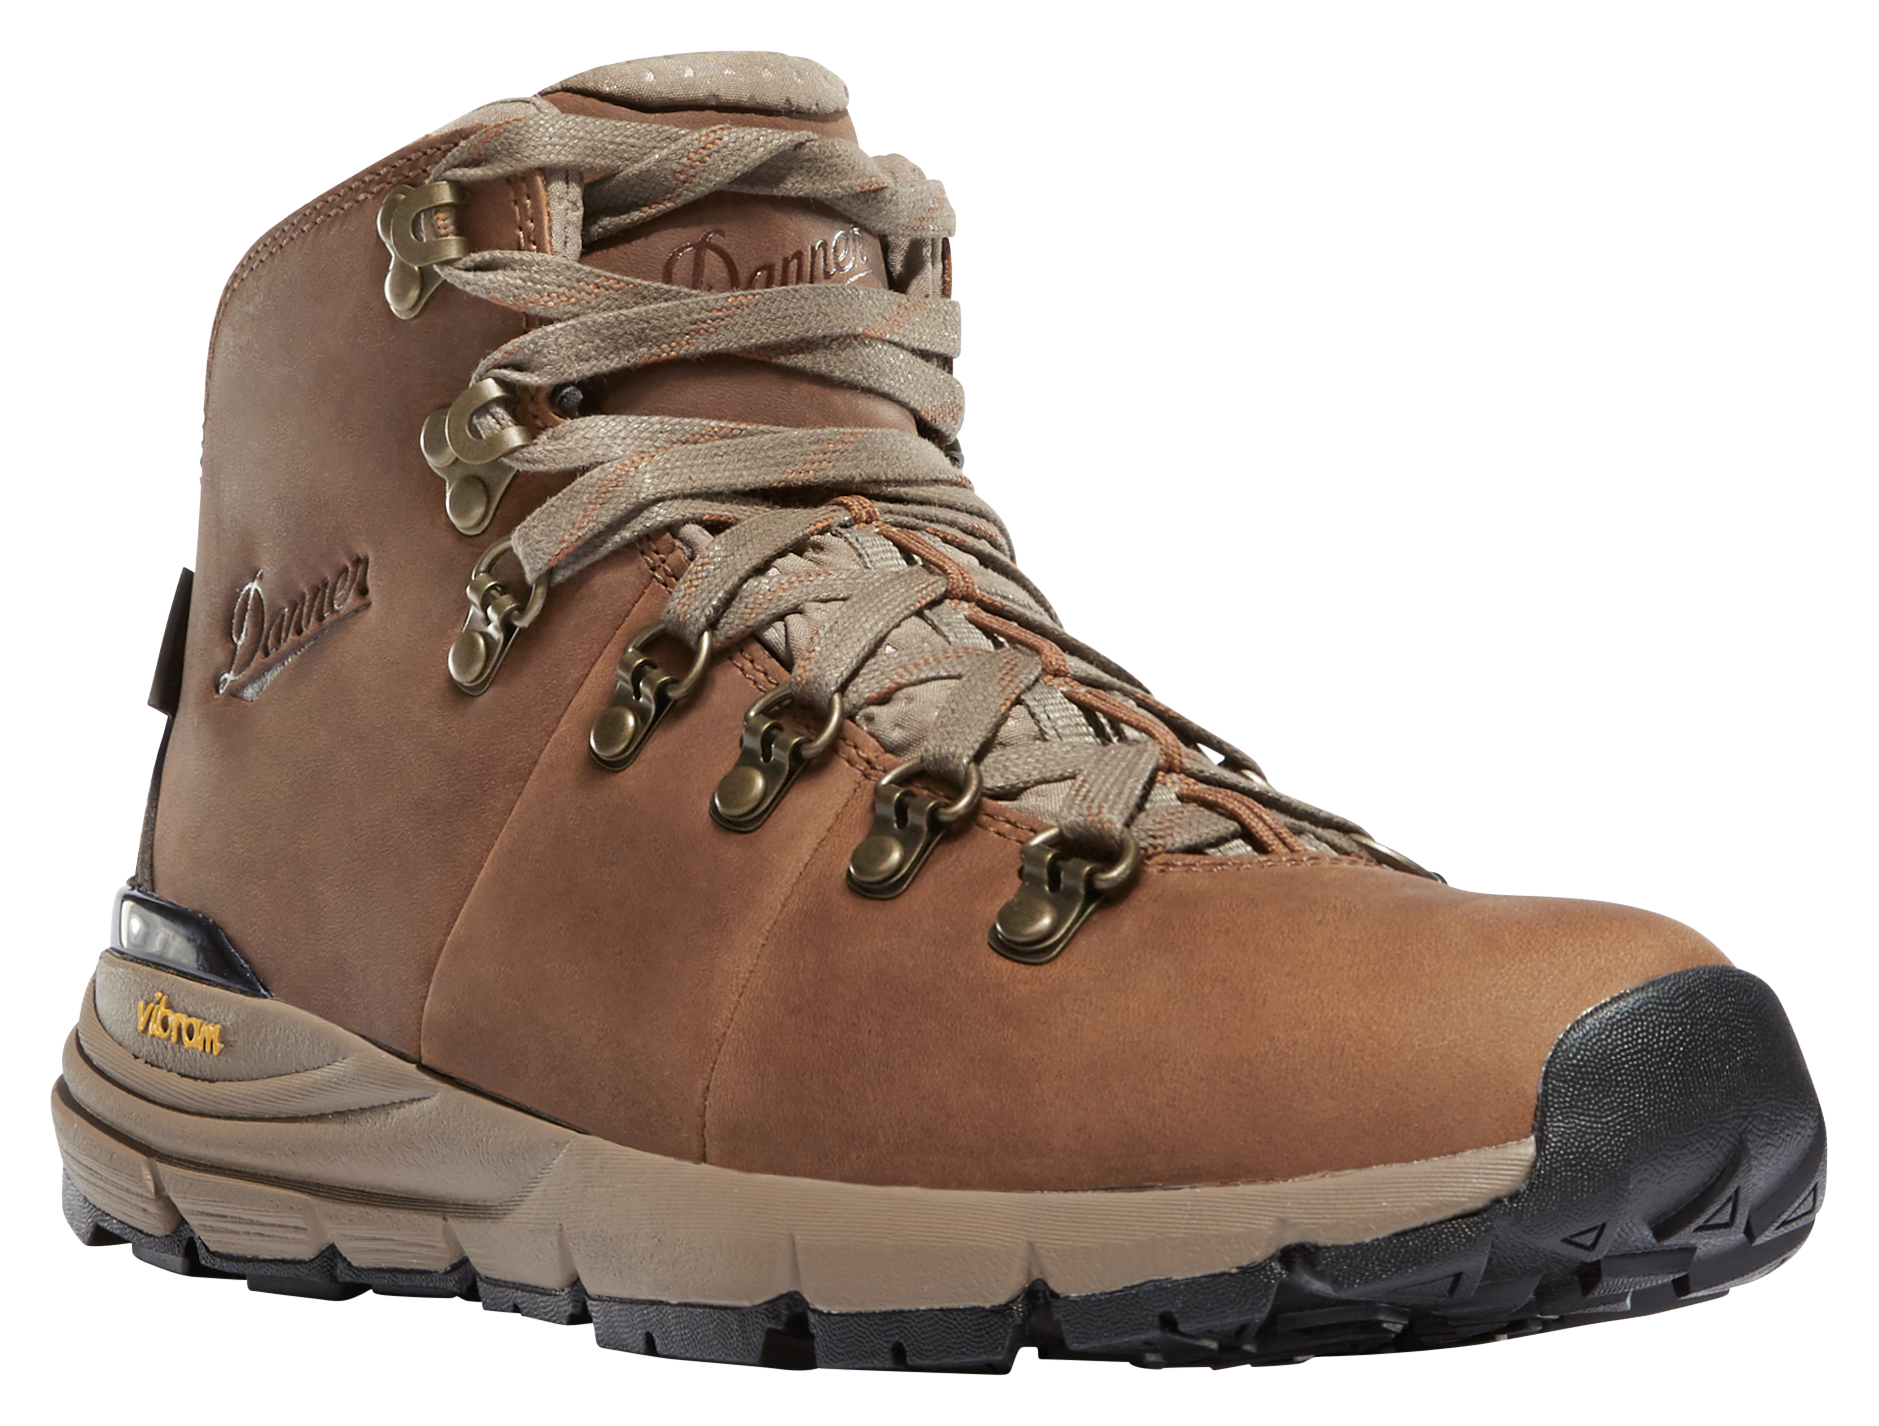 Danner Mountain 600 Leather Waterproof Hiking Boots for Ladies - Rich Brown - 5M